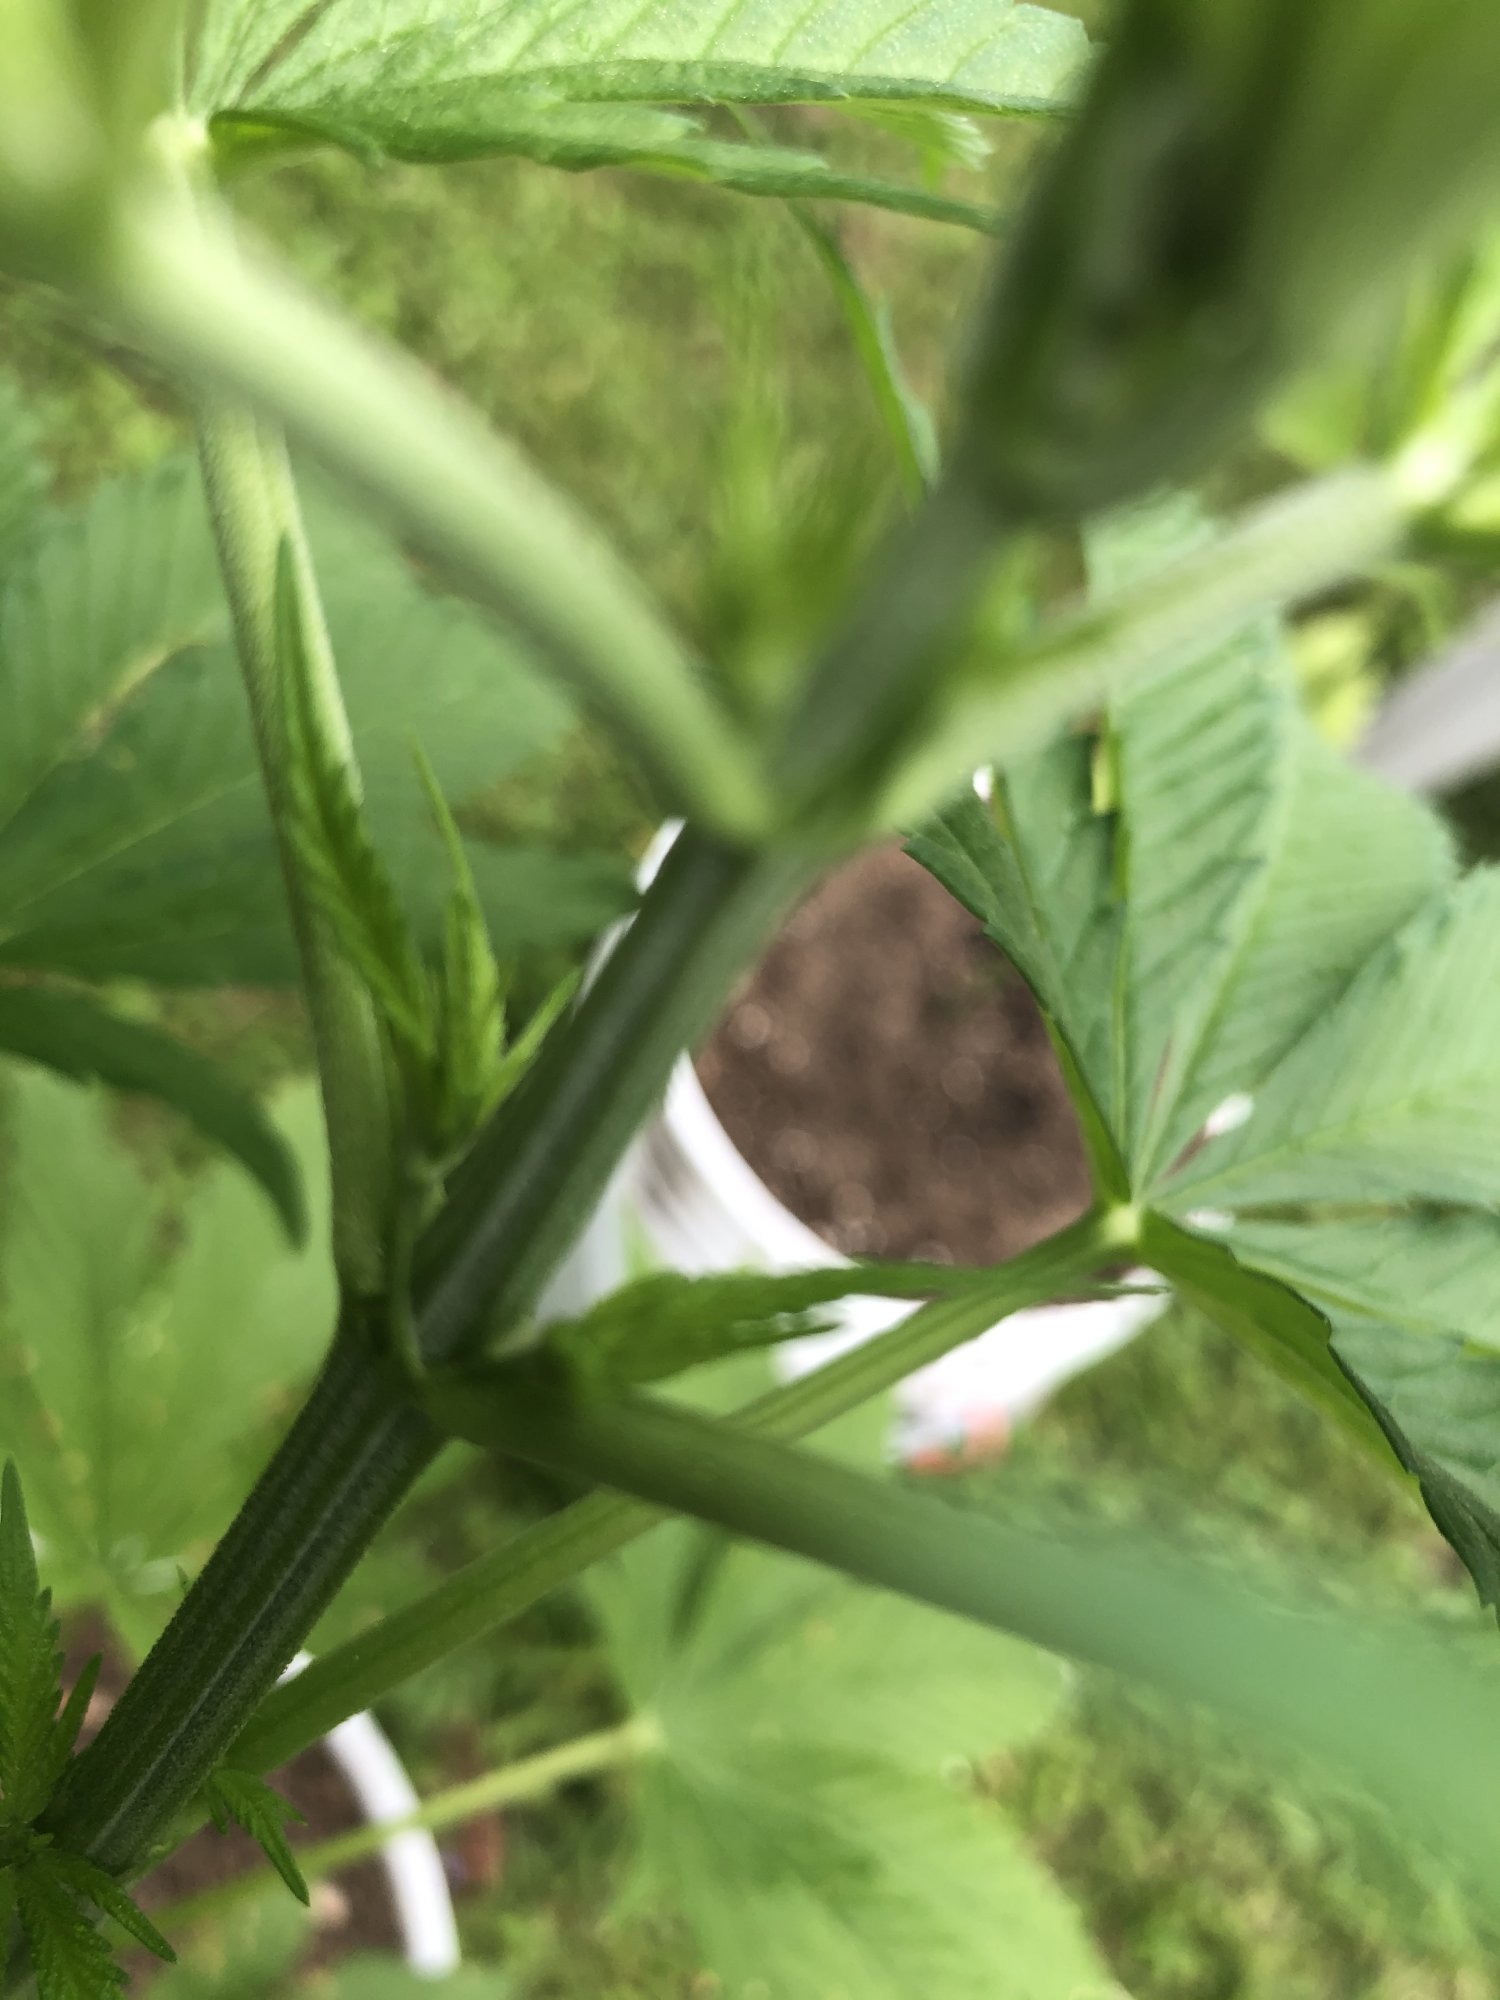 First time grower  help diagnosing please 15